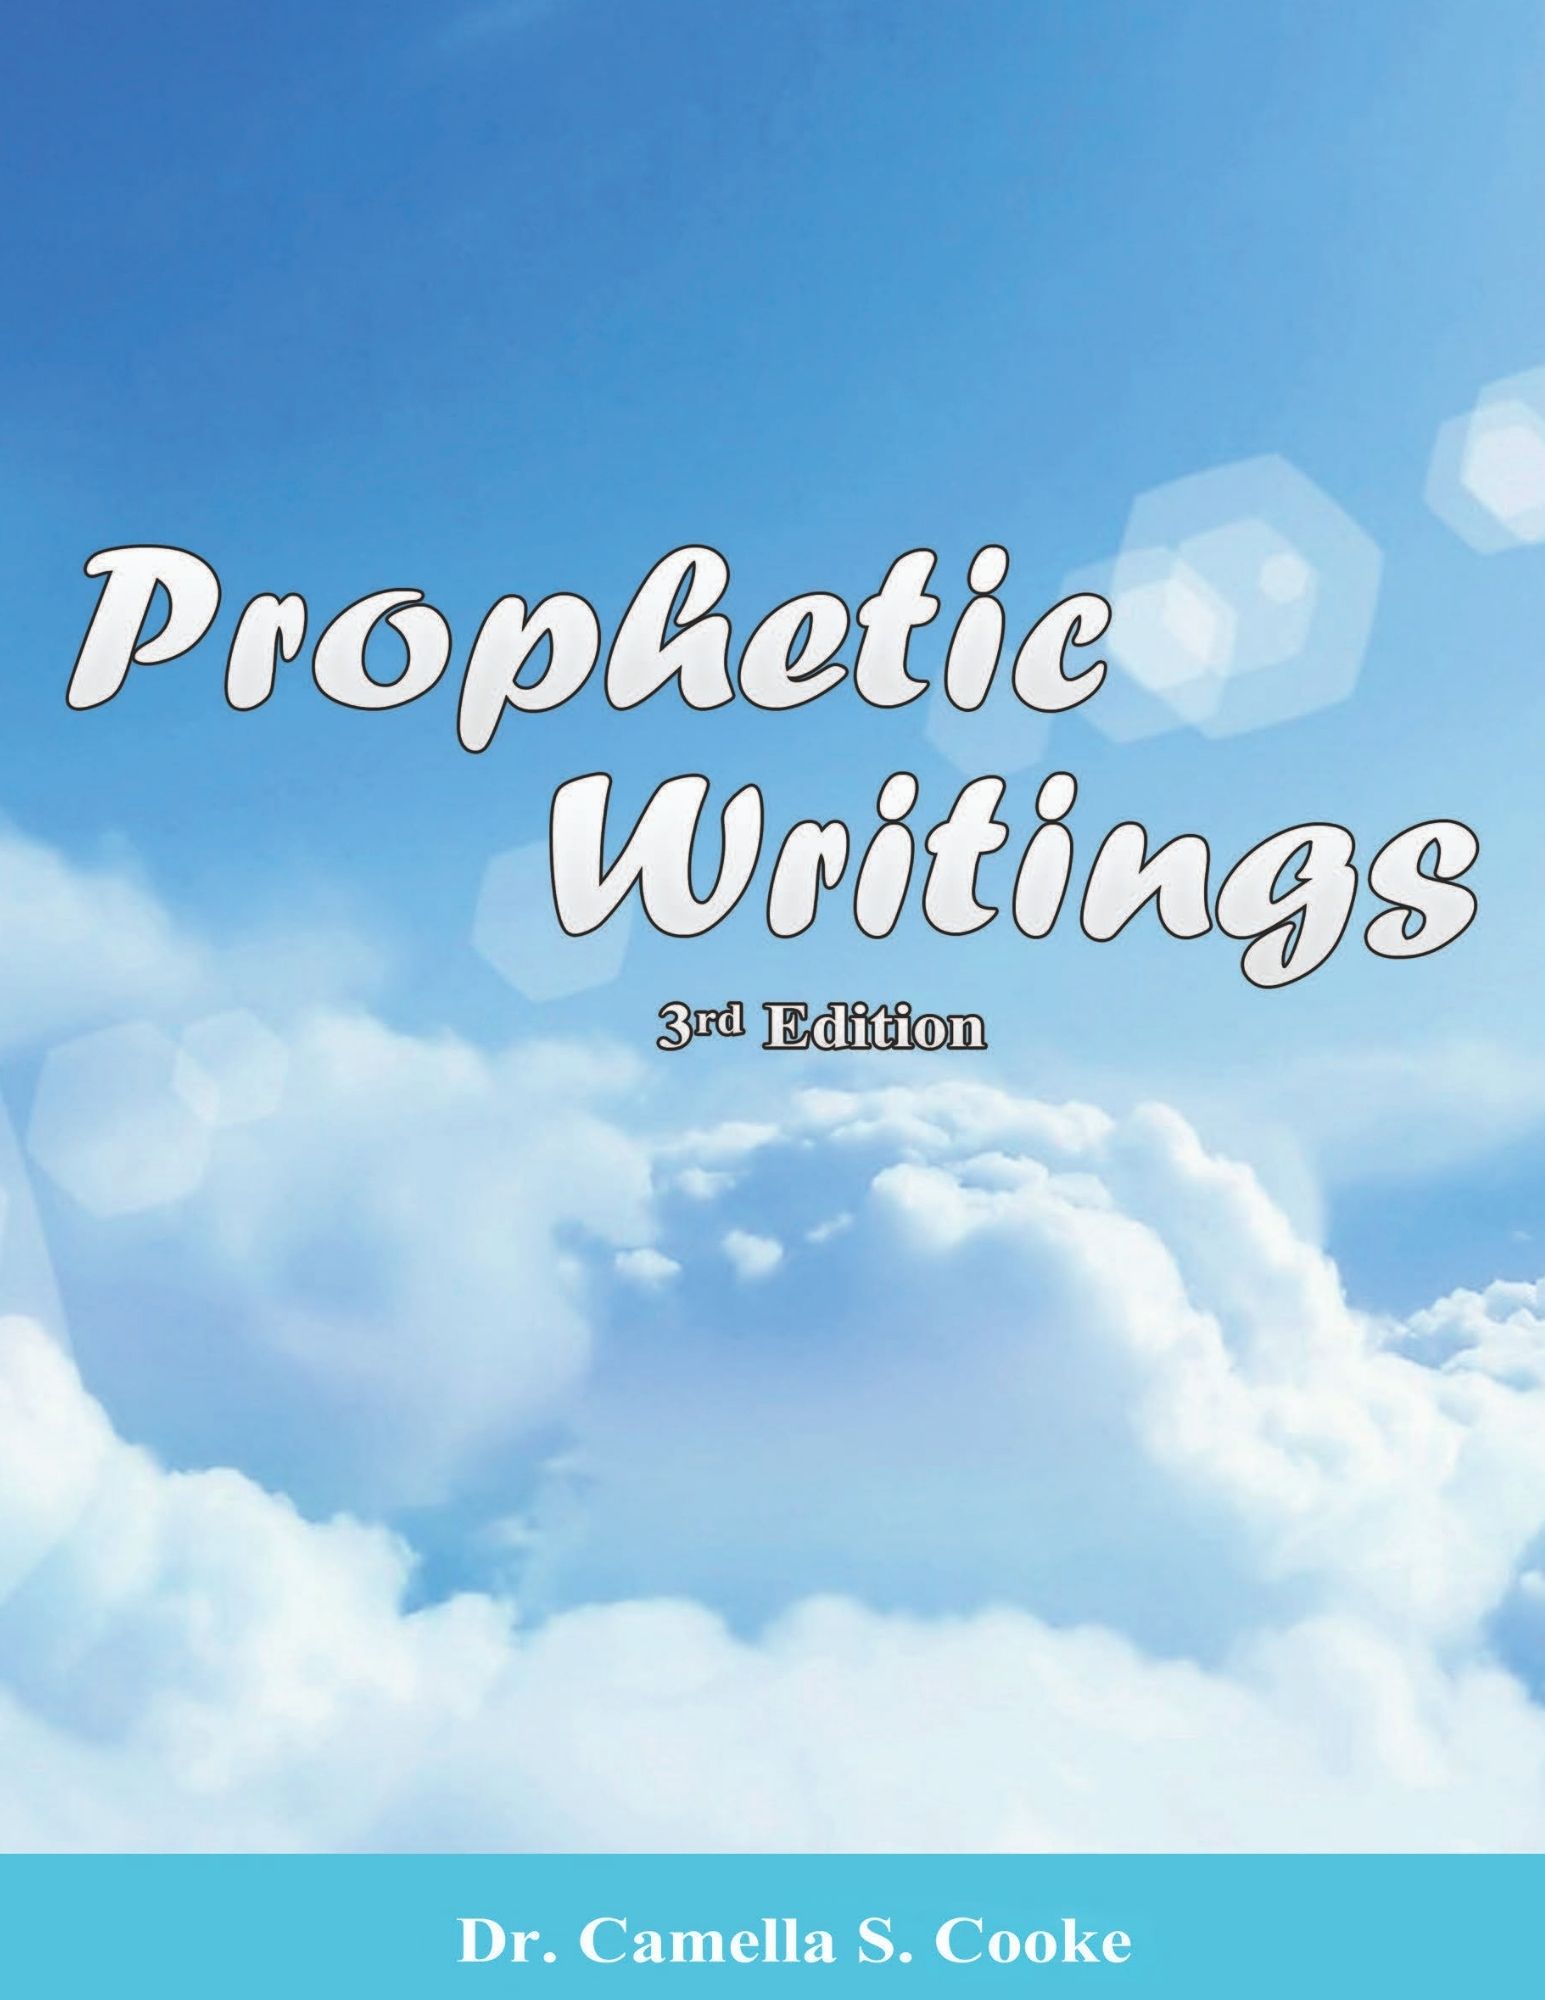 FREE: Prophetic Writings by Dr. Camella Cooke